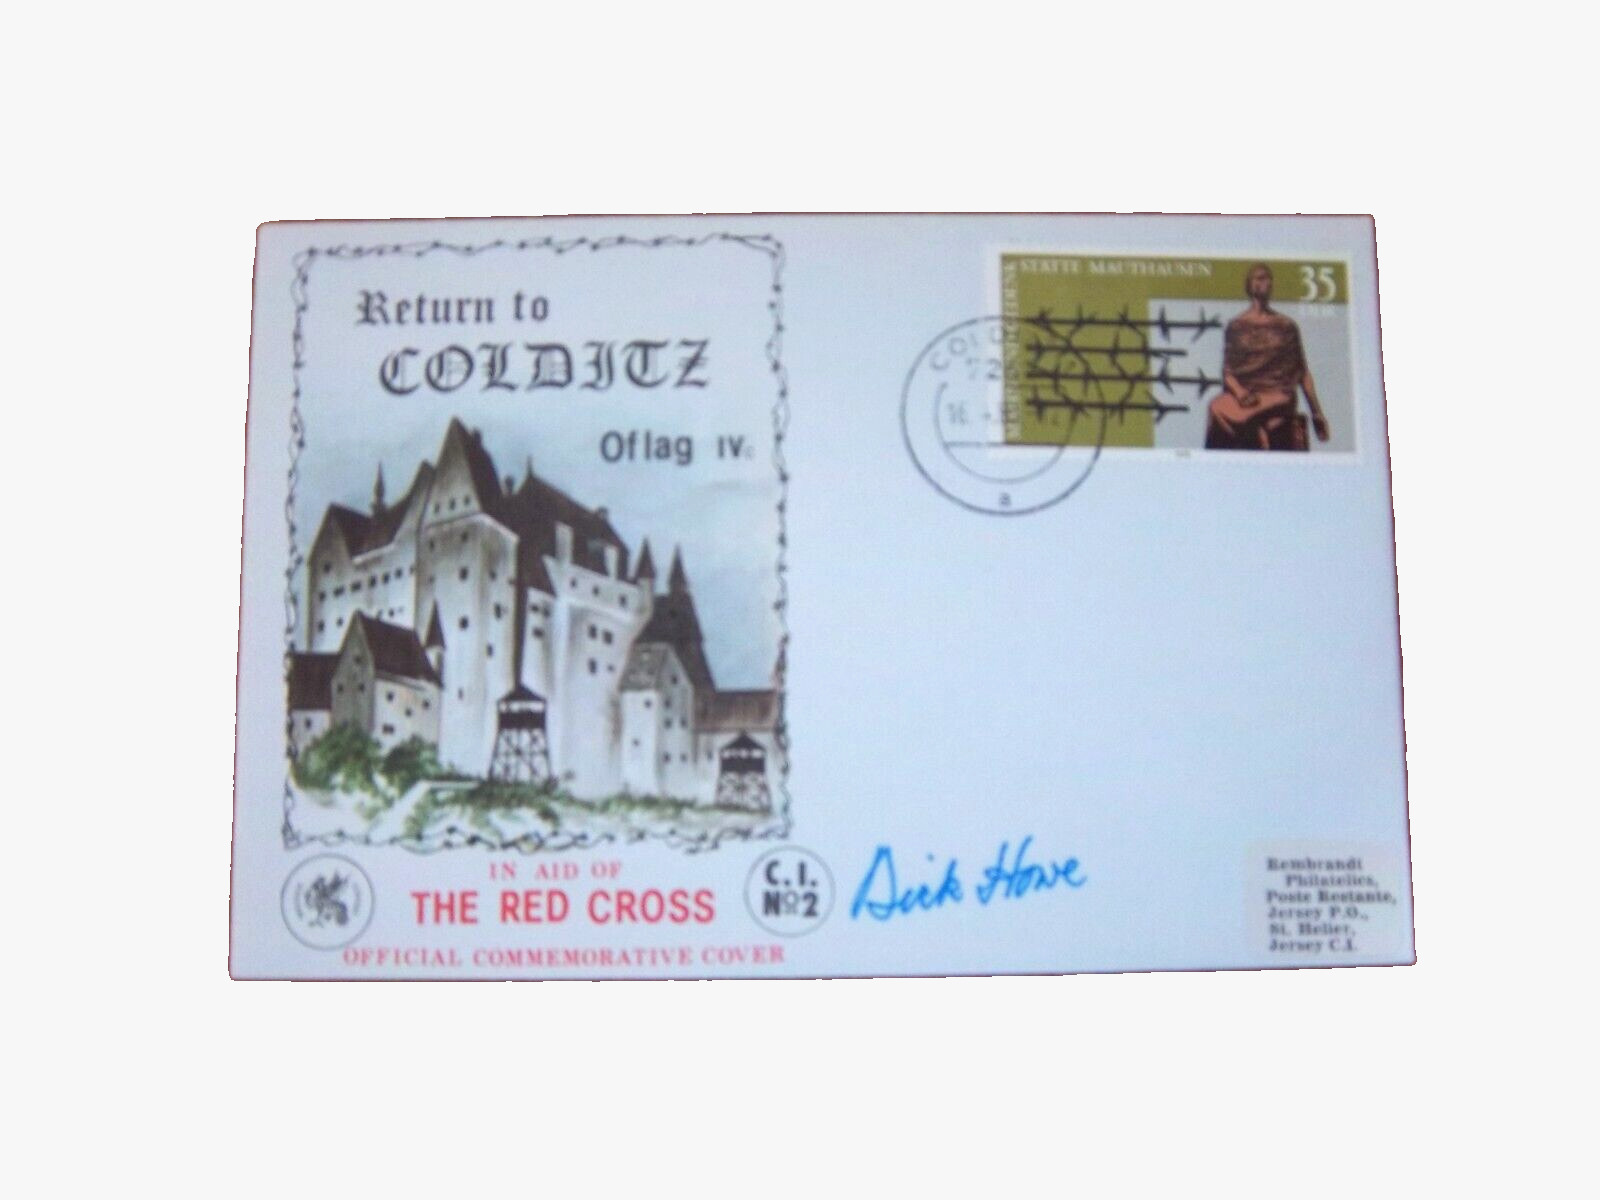 1980 RETURN TO COLDITZ OFLAG 1Vc COVER SIGNED BY MAJOR RICHARD HOWE HOWE MBE,MC